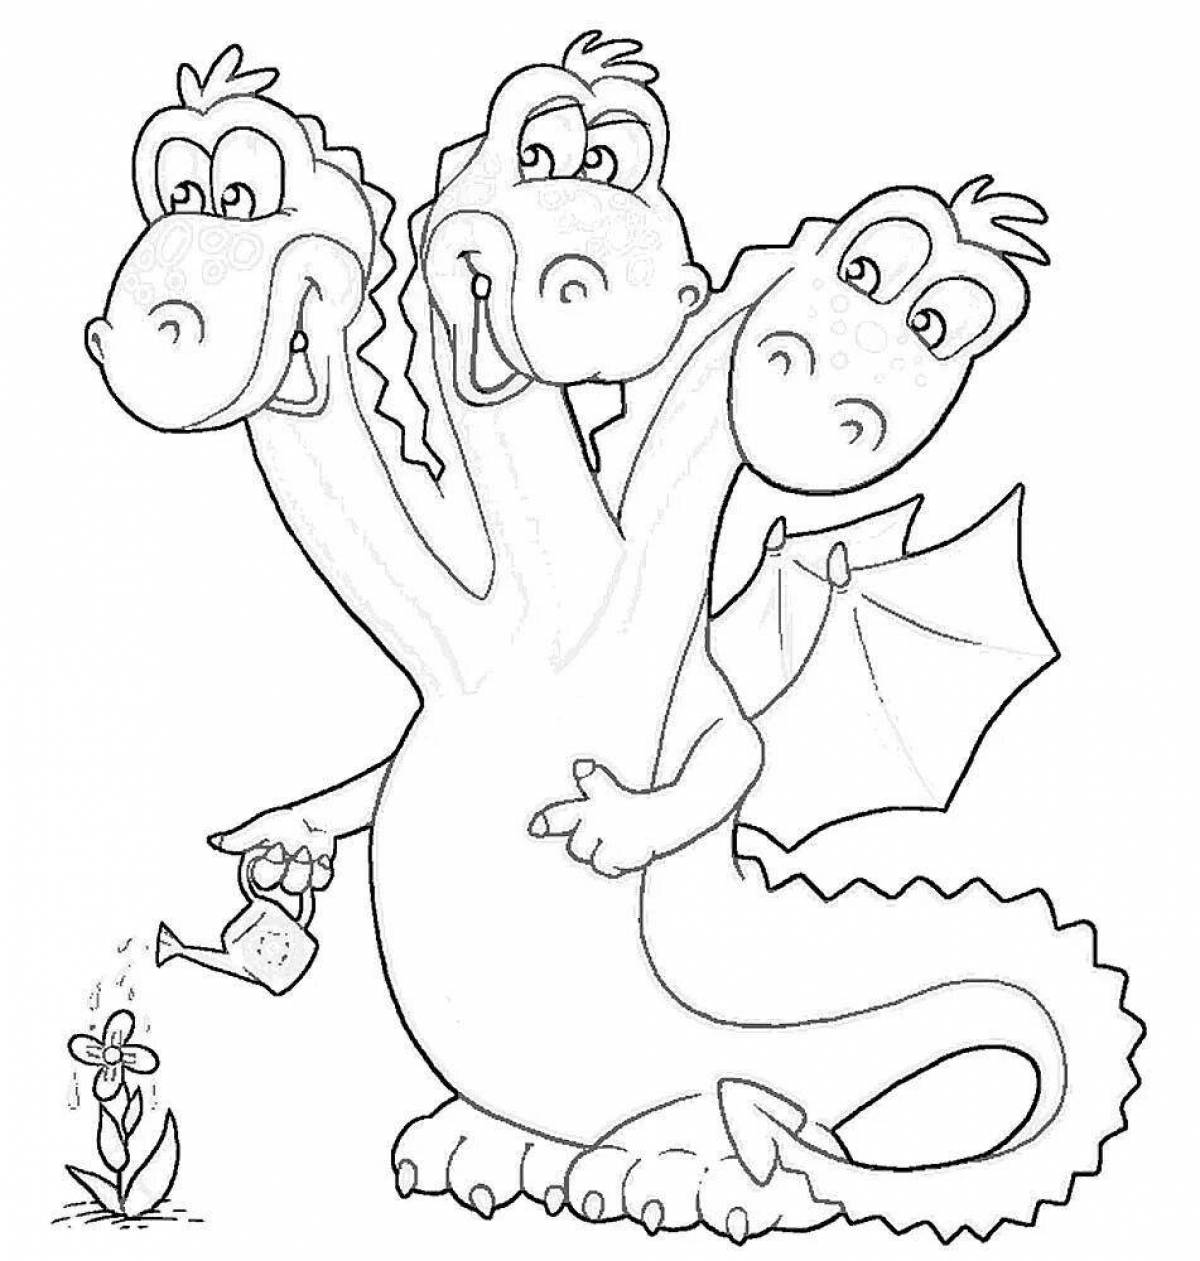 Impressive six-headed snake coloring page